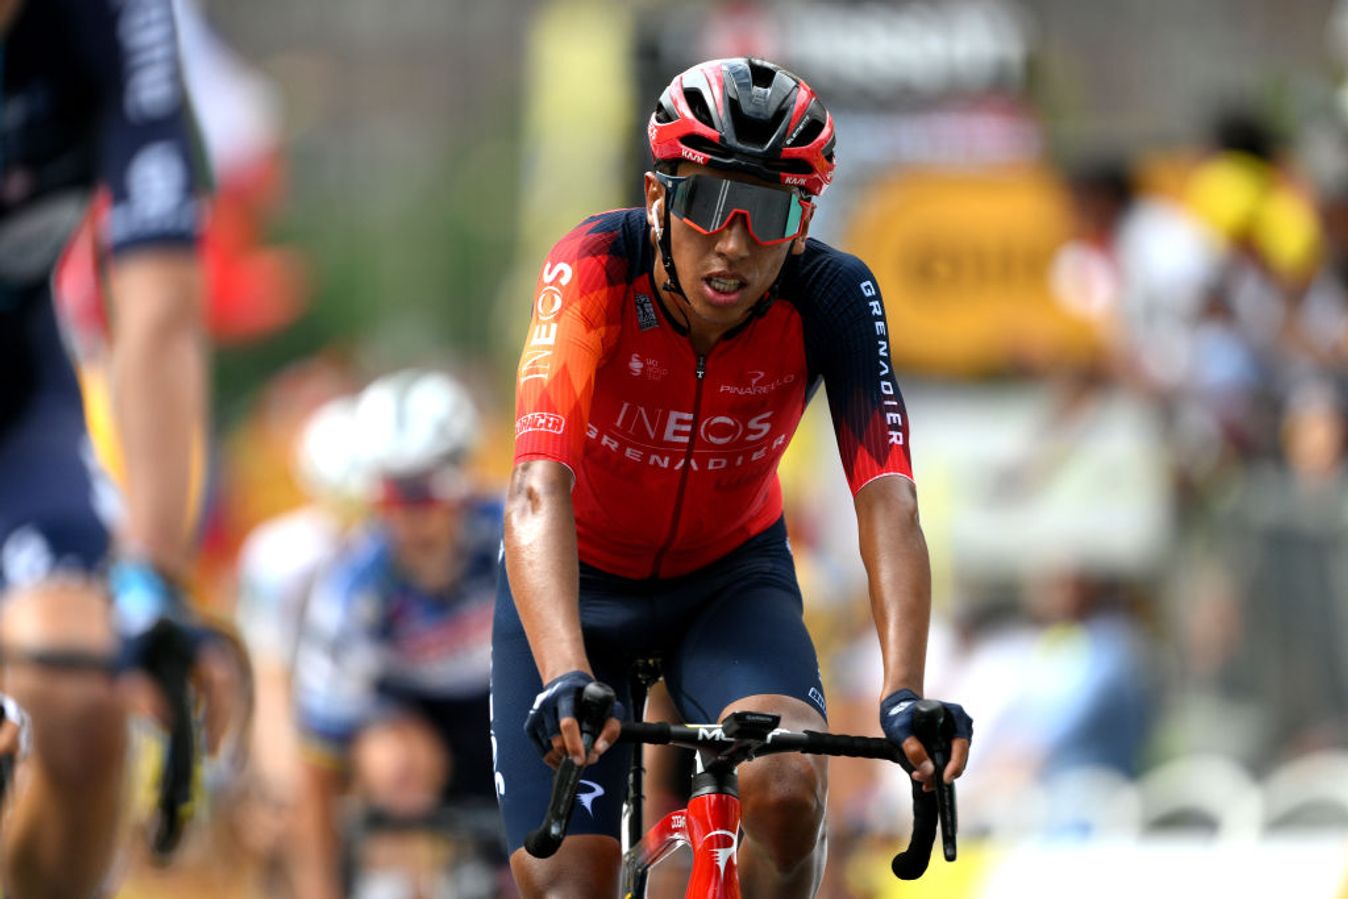 Egan Bernal's injuries have left Ineos on the back foot